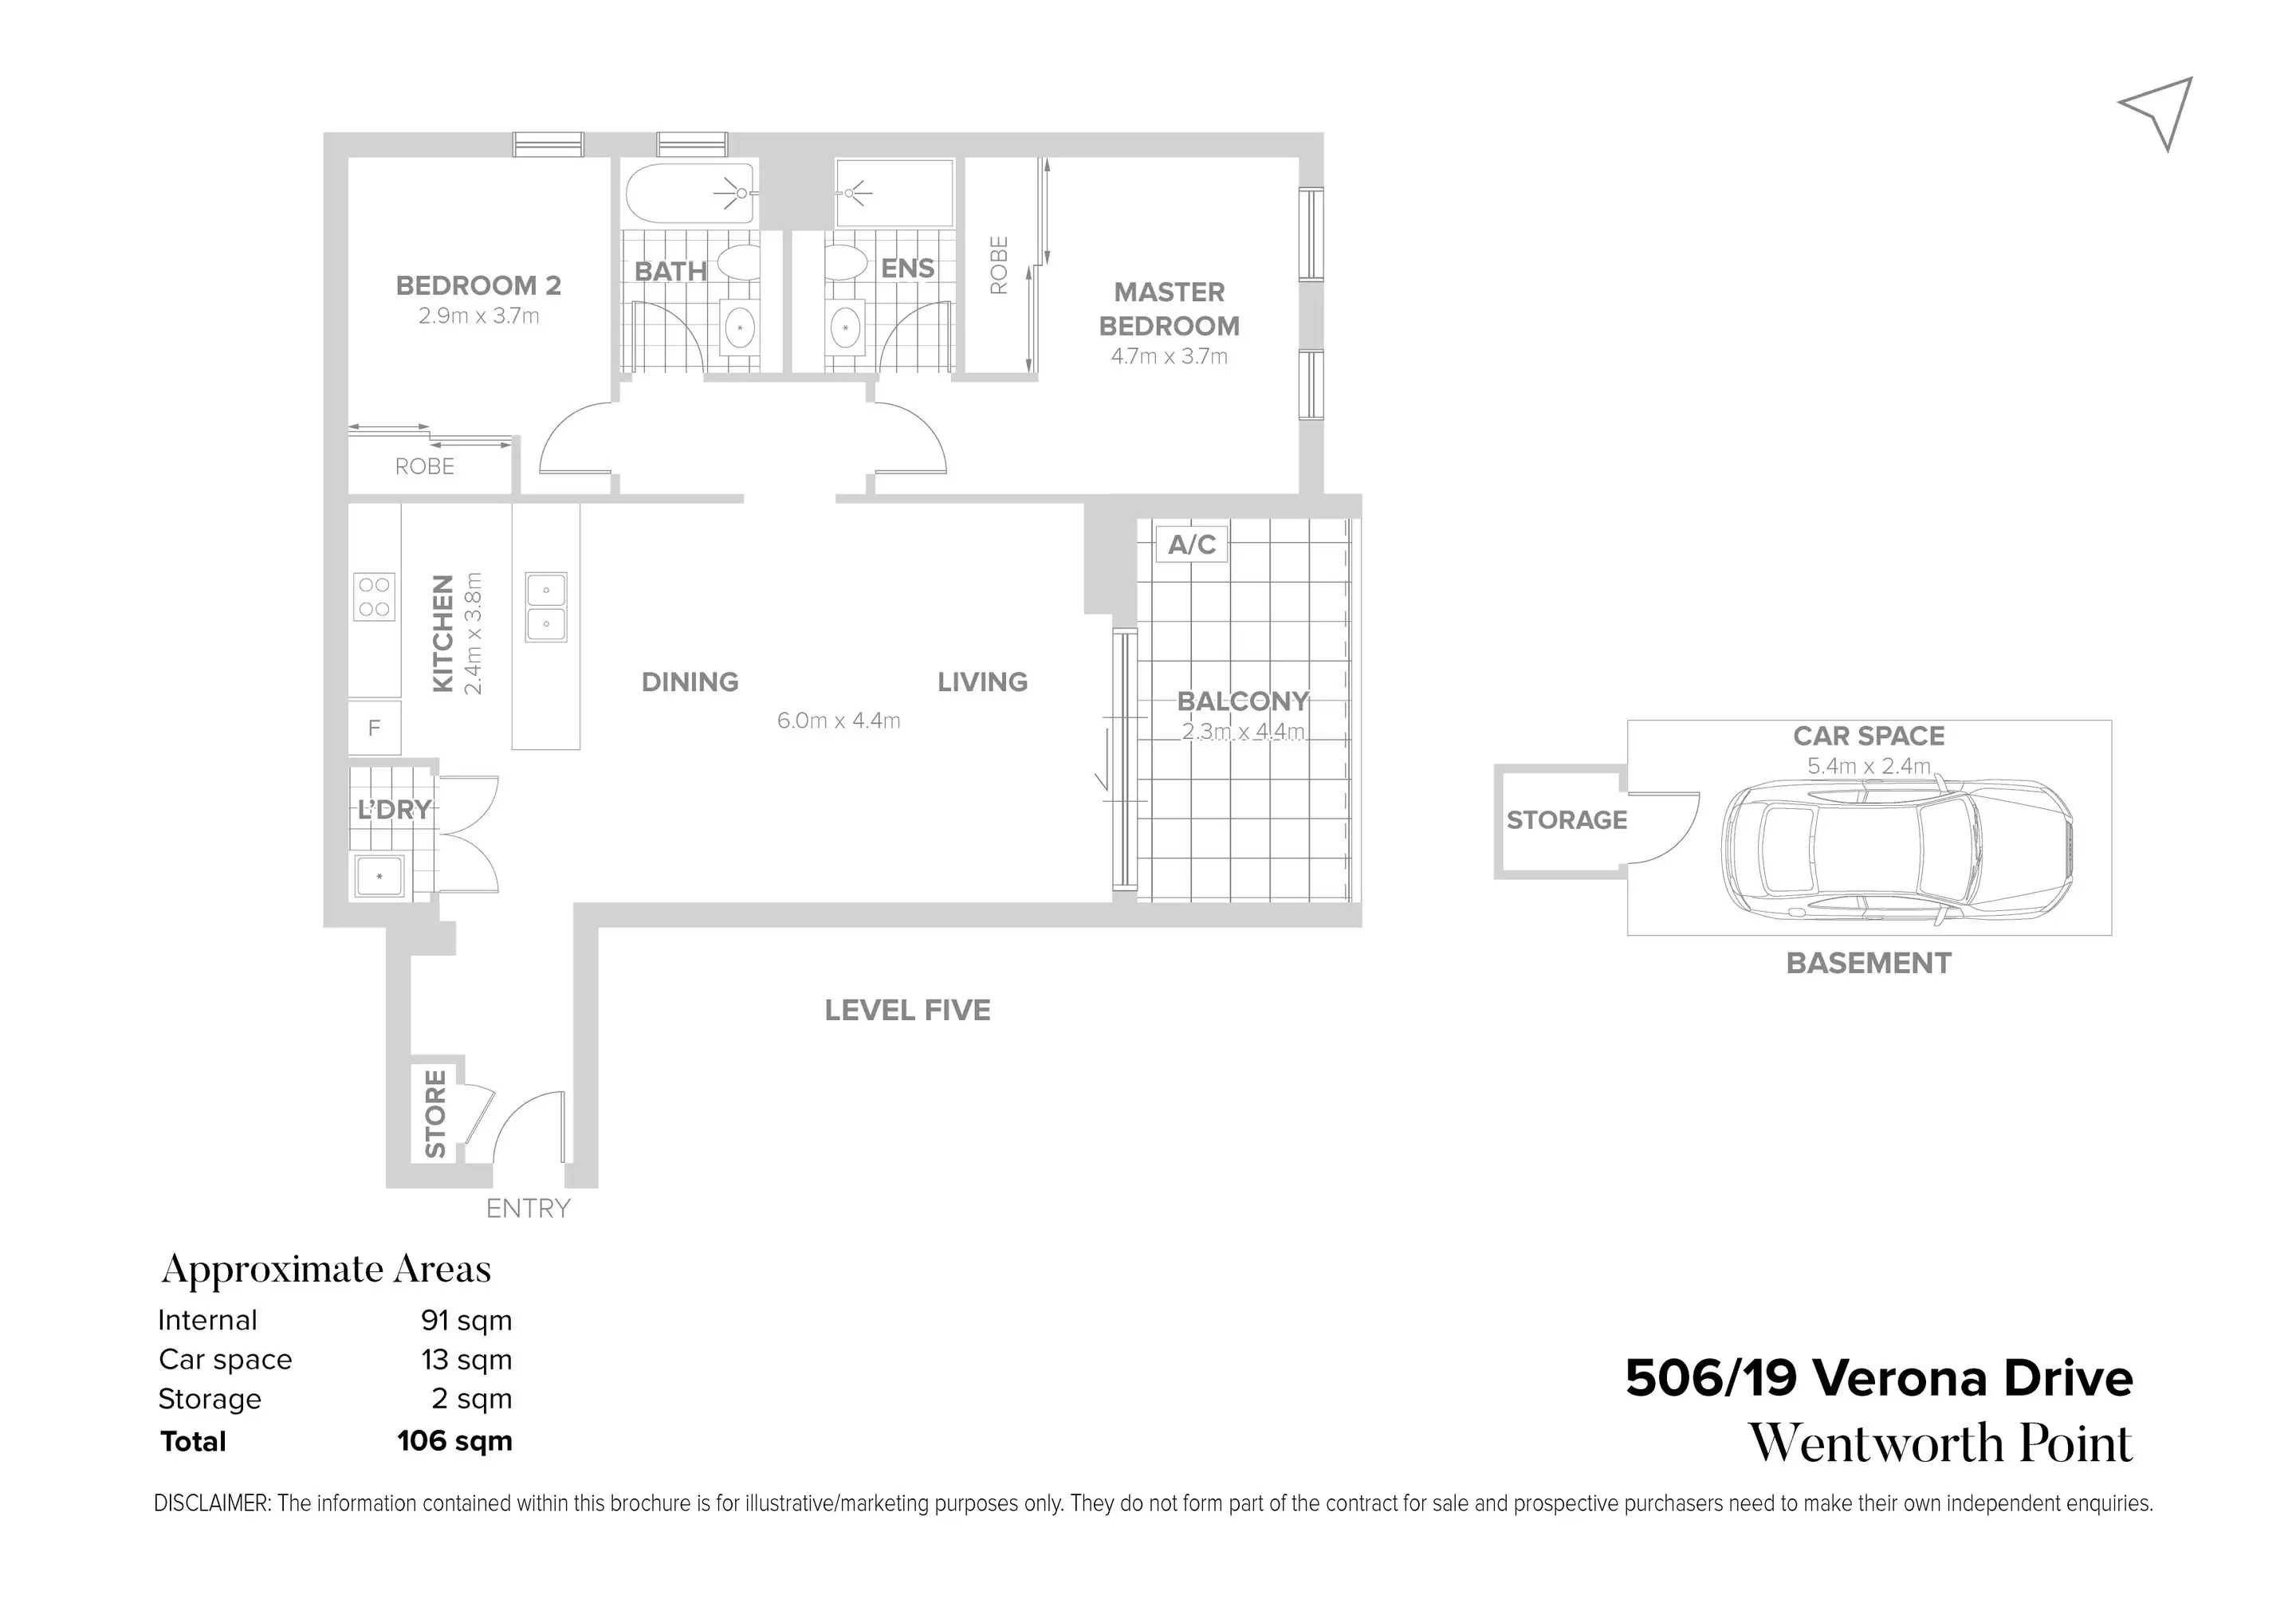 506/19 Verona Drive, Wentworth Point Sold by Chidiac Realty - floorplan